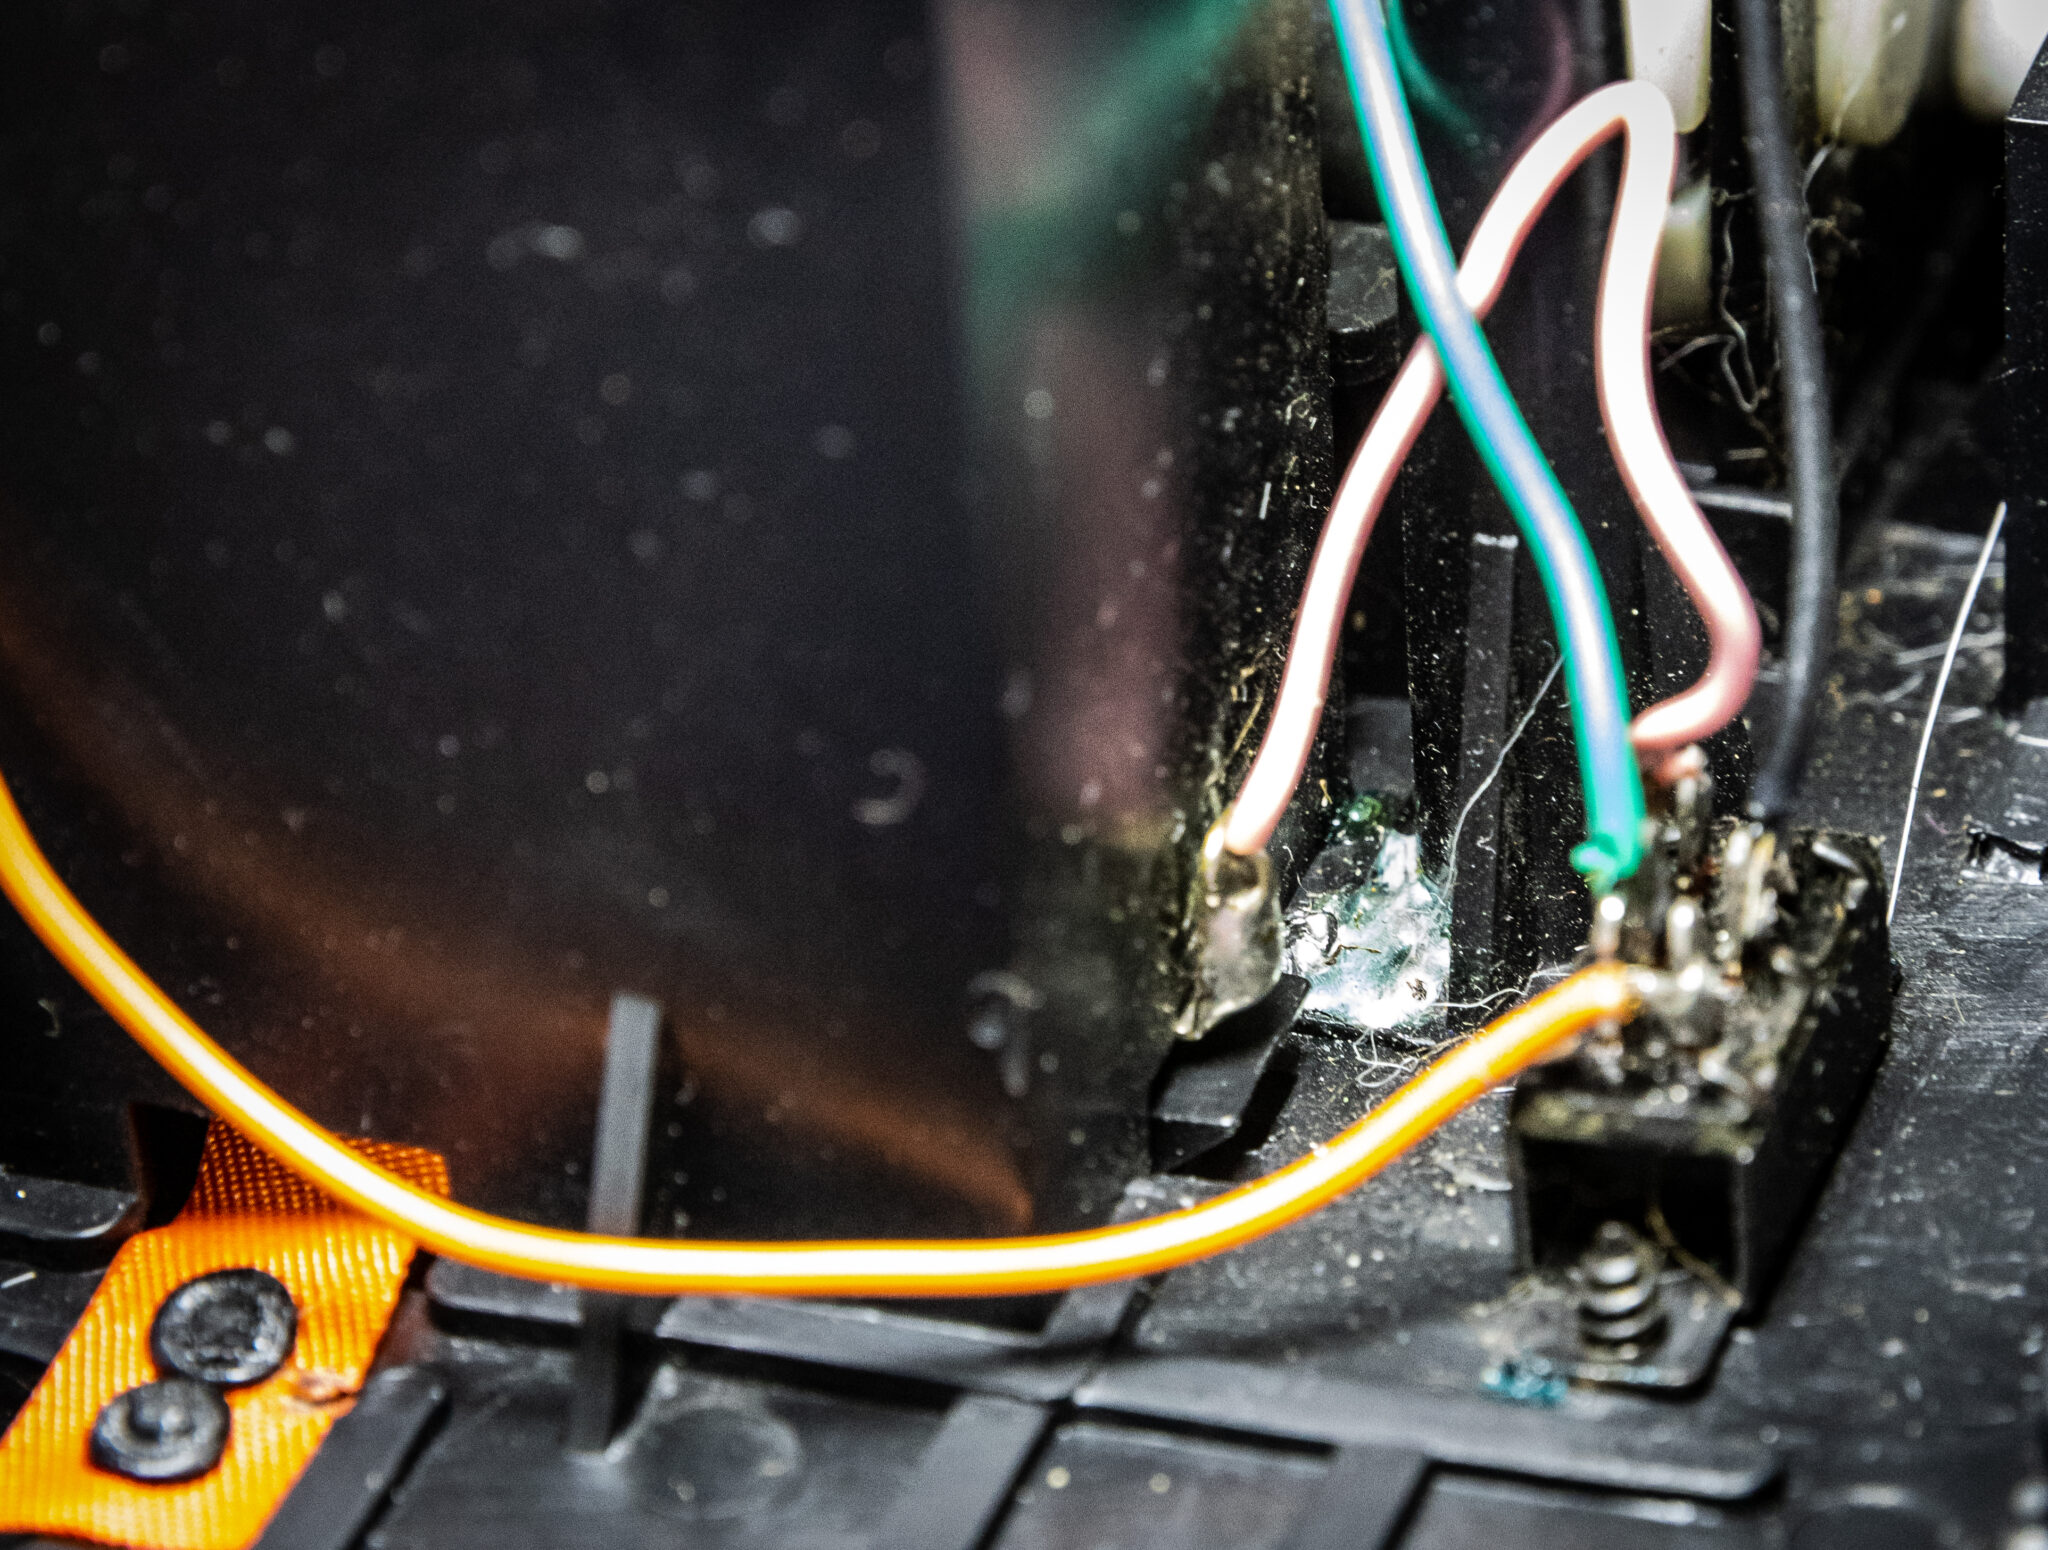 A photo of solder dripped inside a Petster case